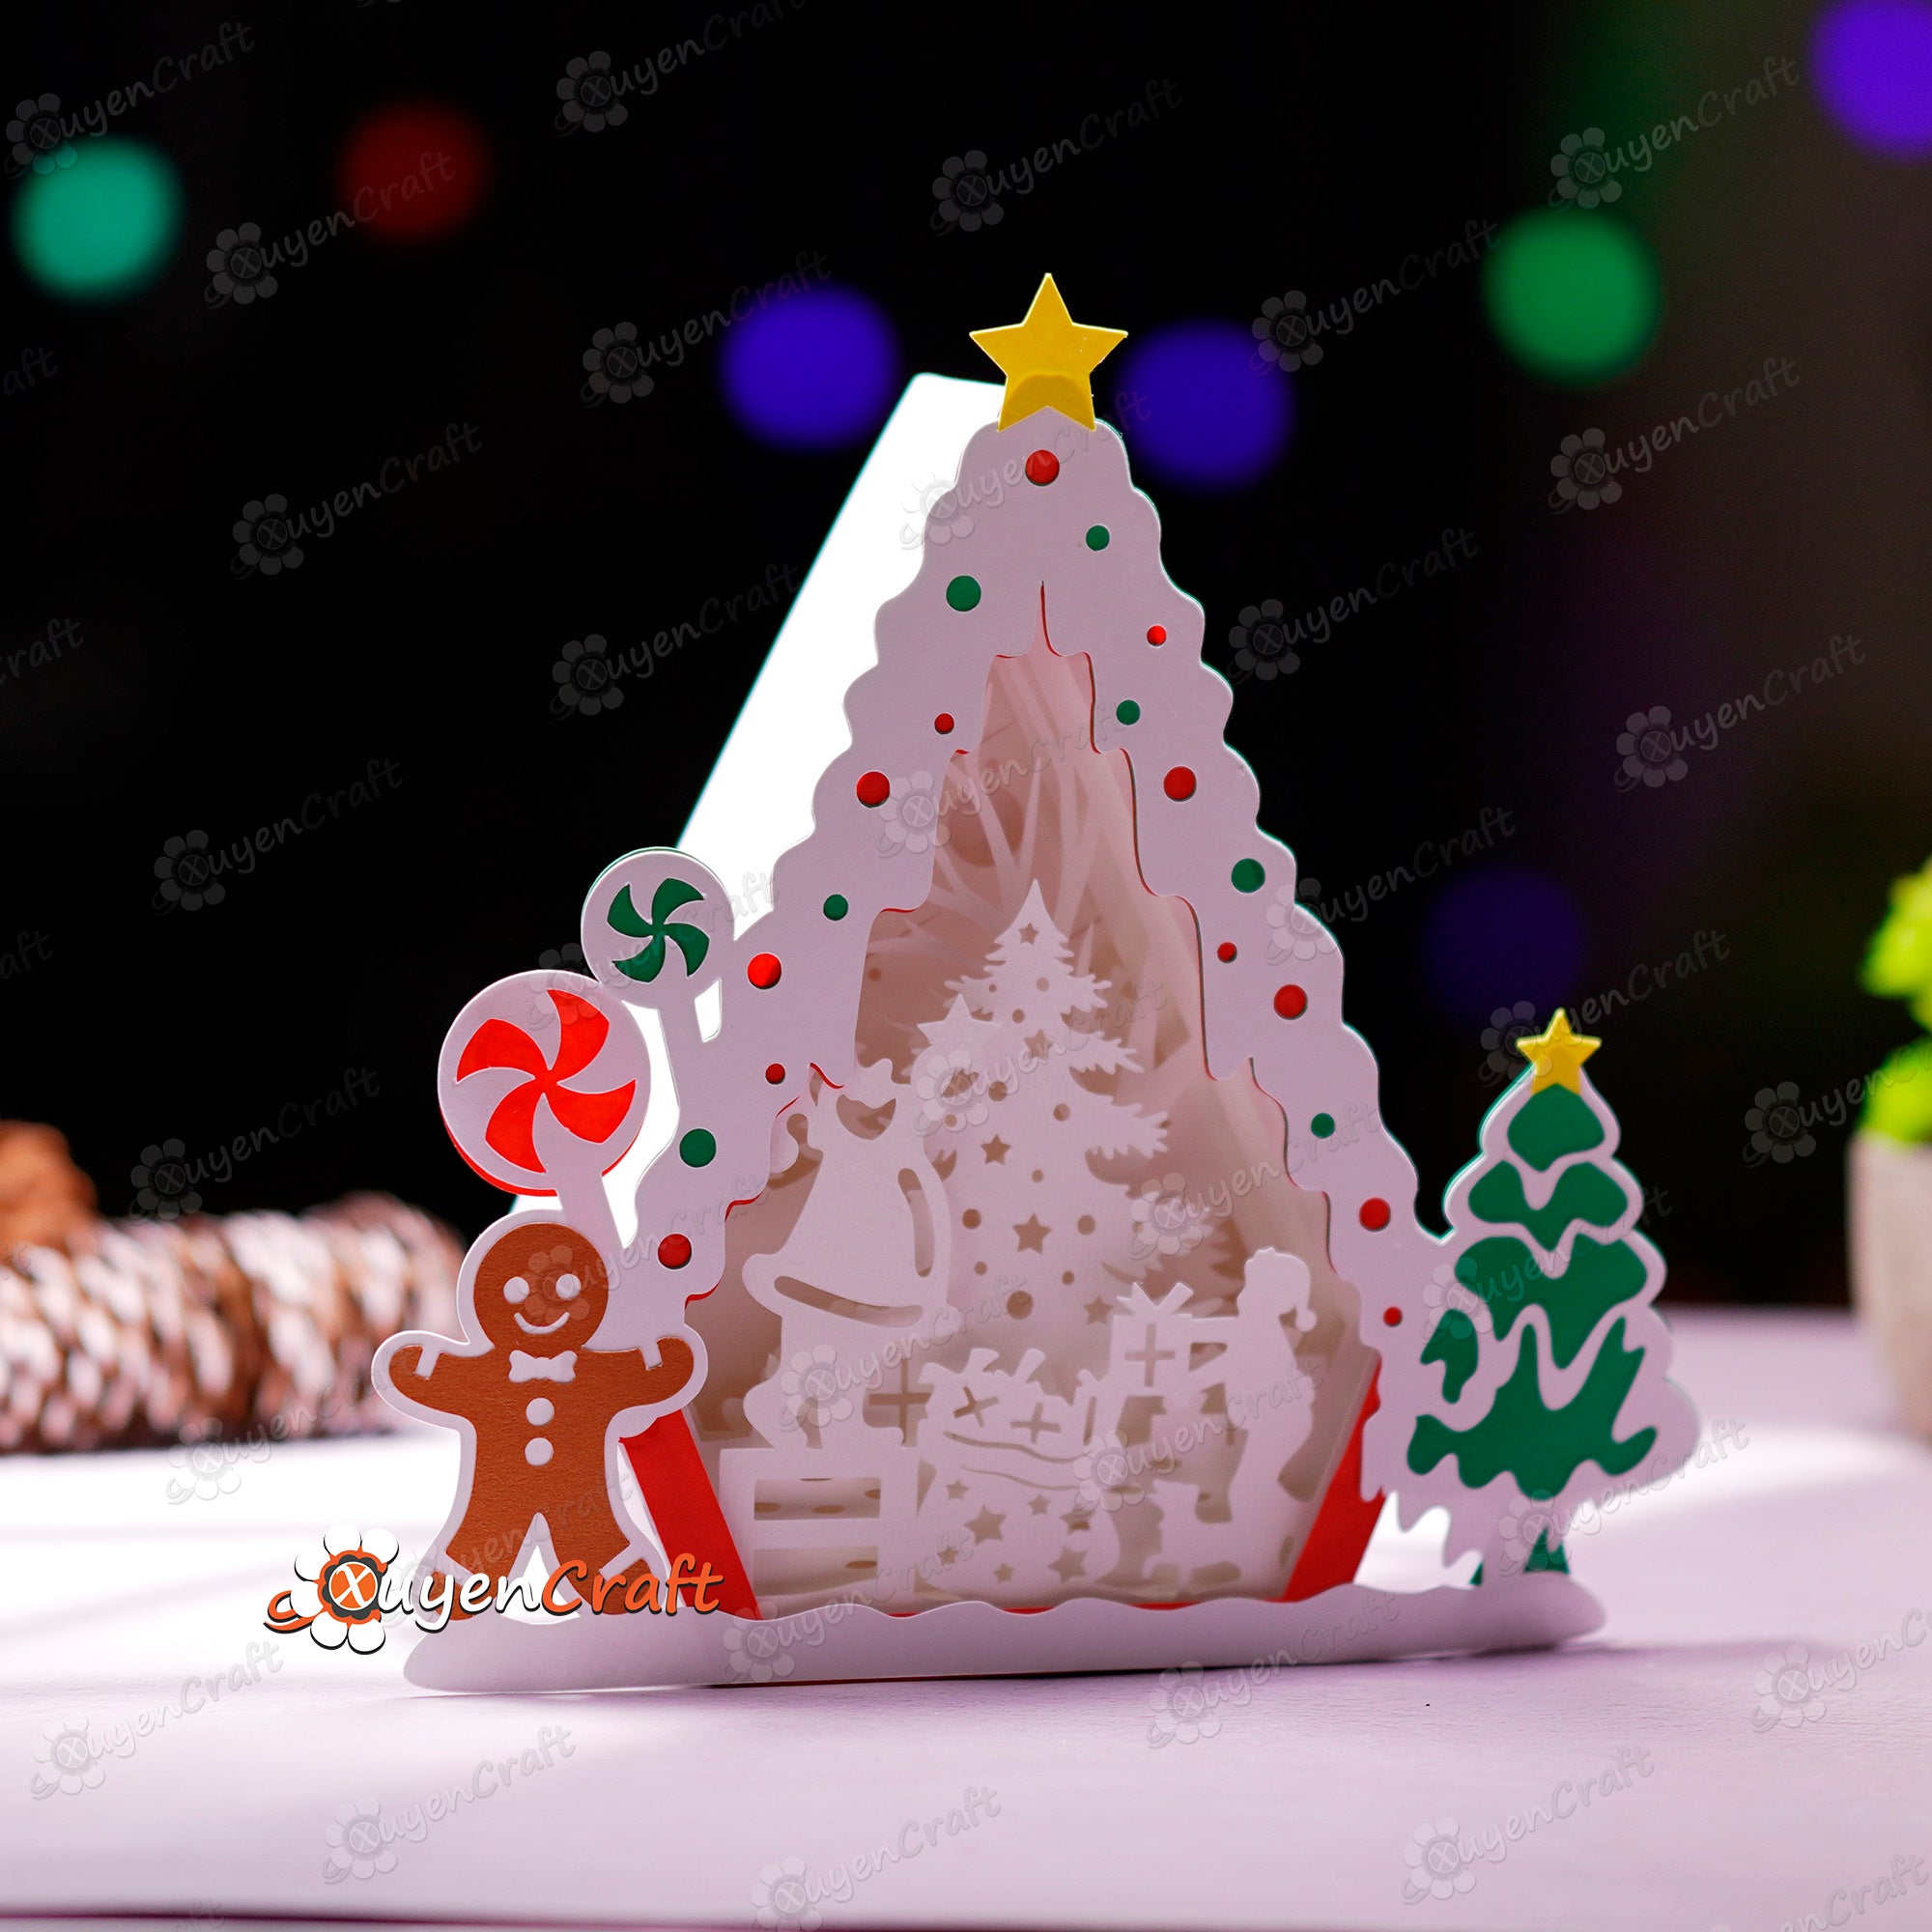 Santa's Christmas Trees in Gingerbread House Shadow Box SVG Light Box - Candy House Christmas Lantern, Paper Cut Template, Snowman House Svg